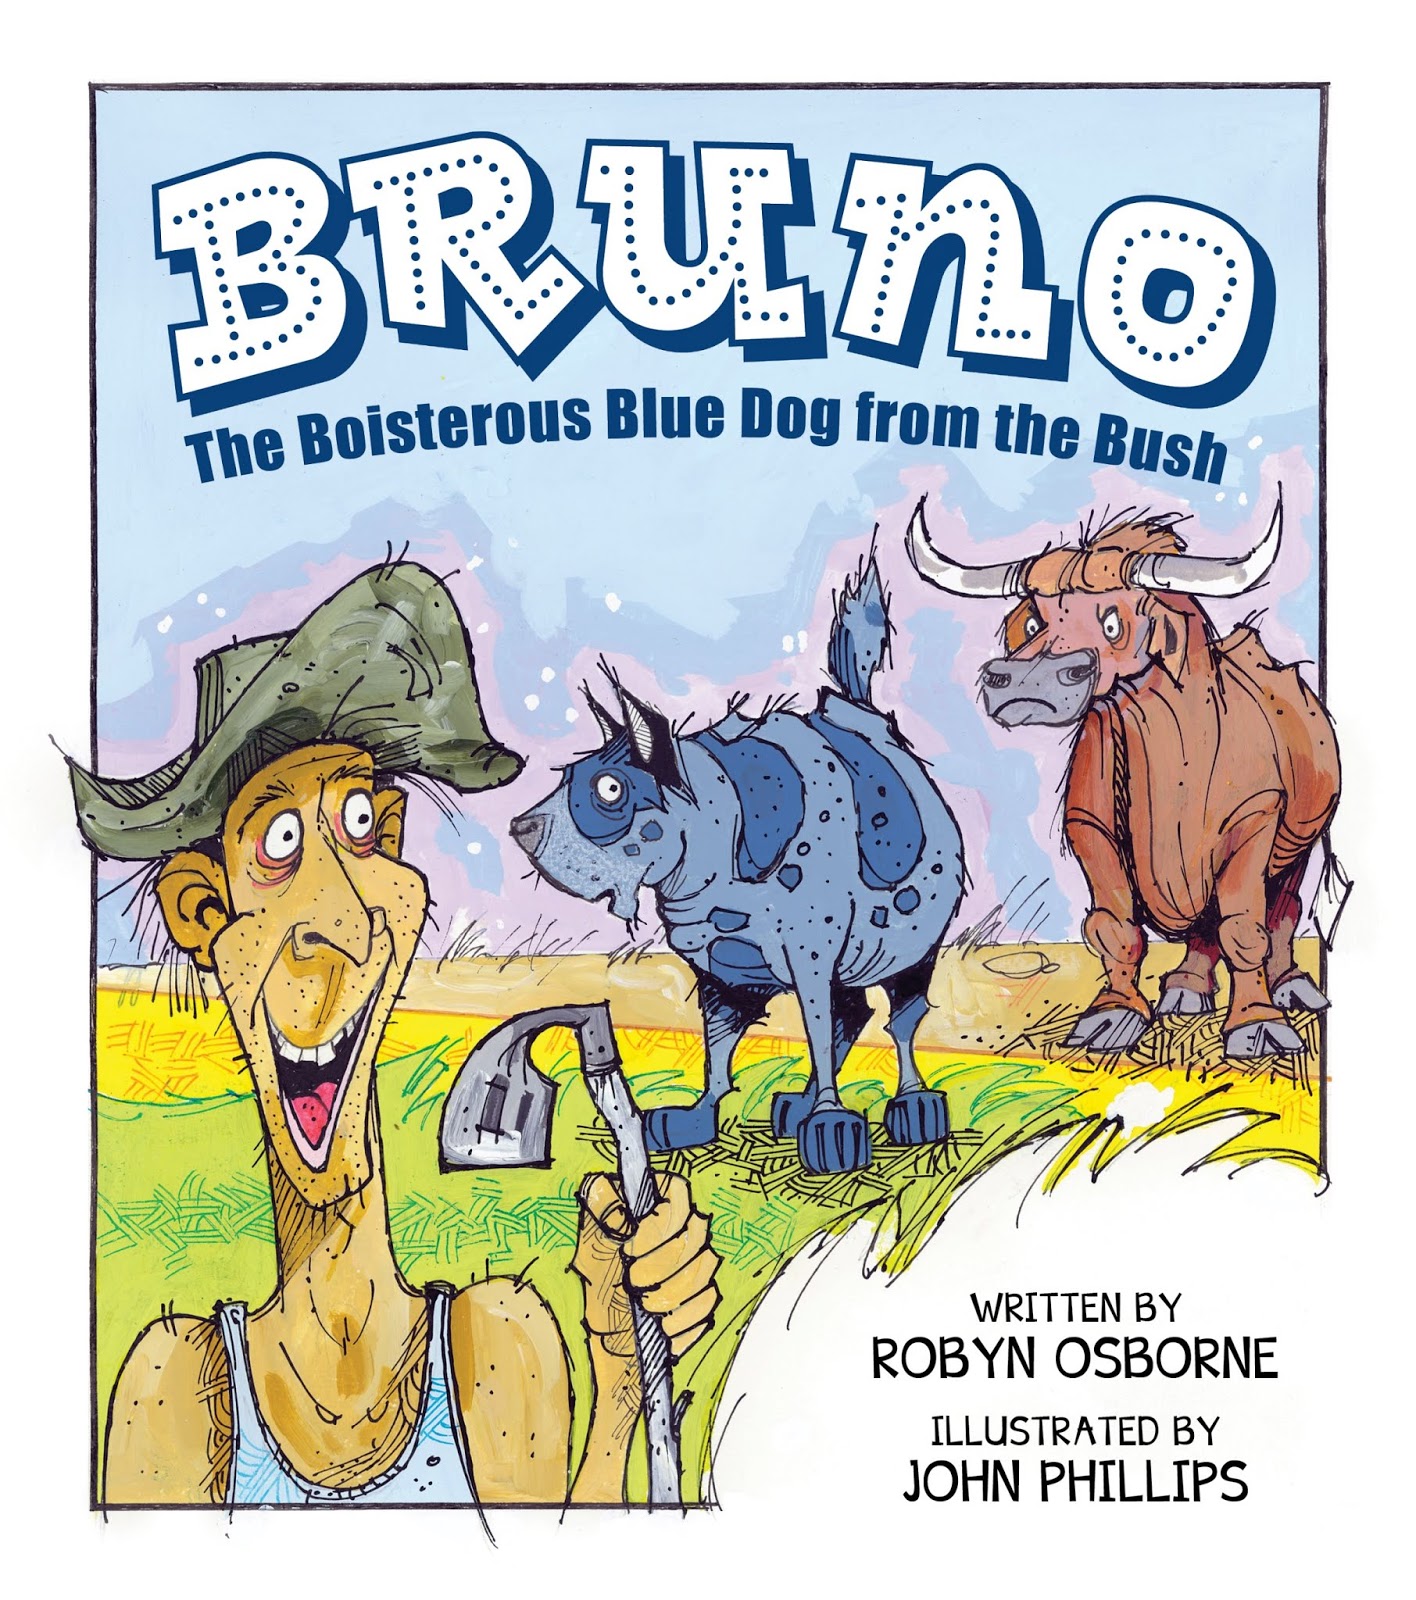 Buzz Words: Bruno The Boisterous Blue Dog from the Bush